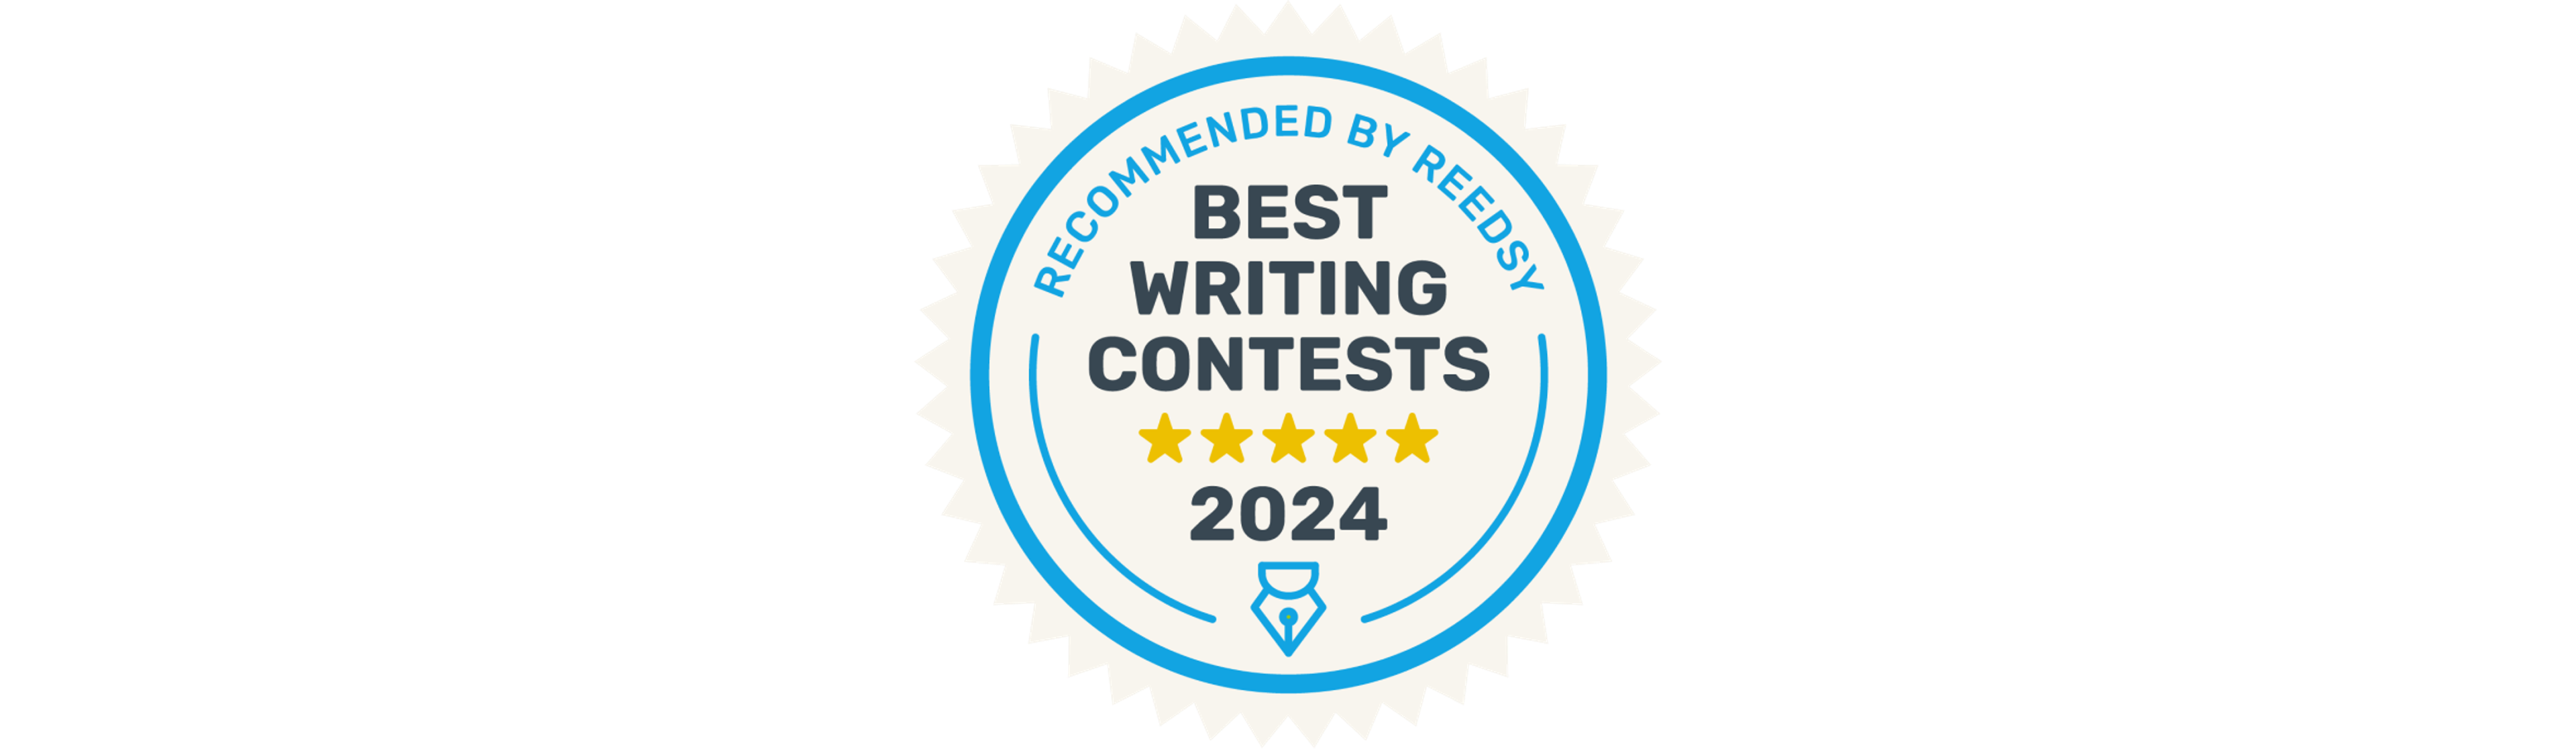 Reedsy Best Writing Contests 2024